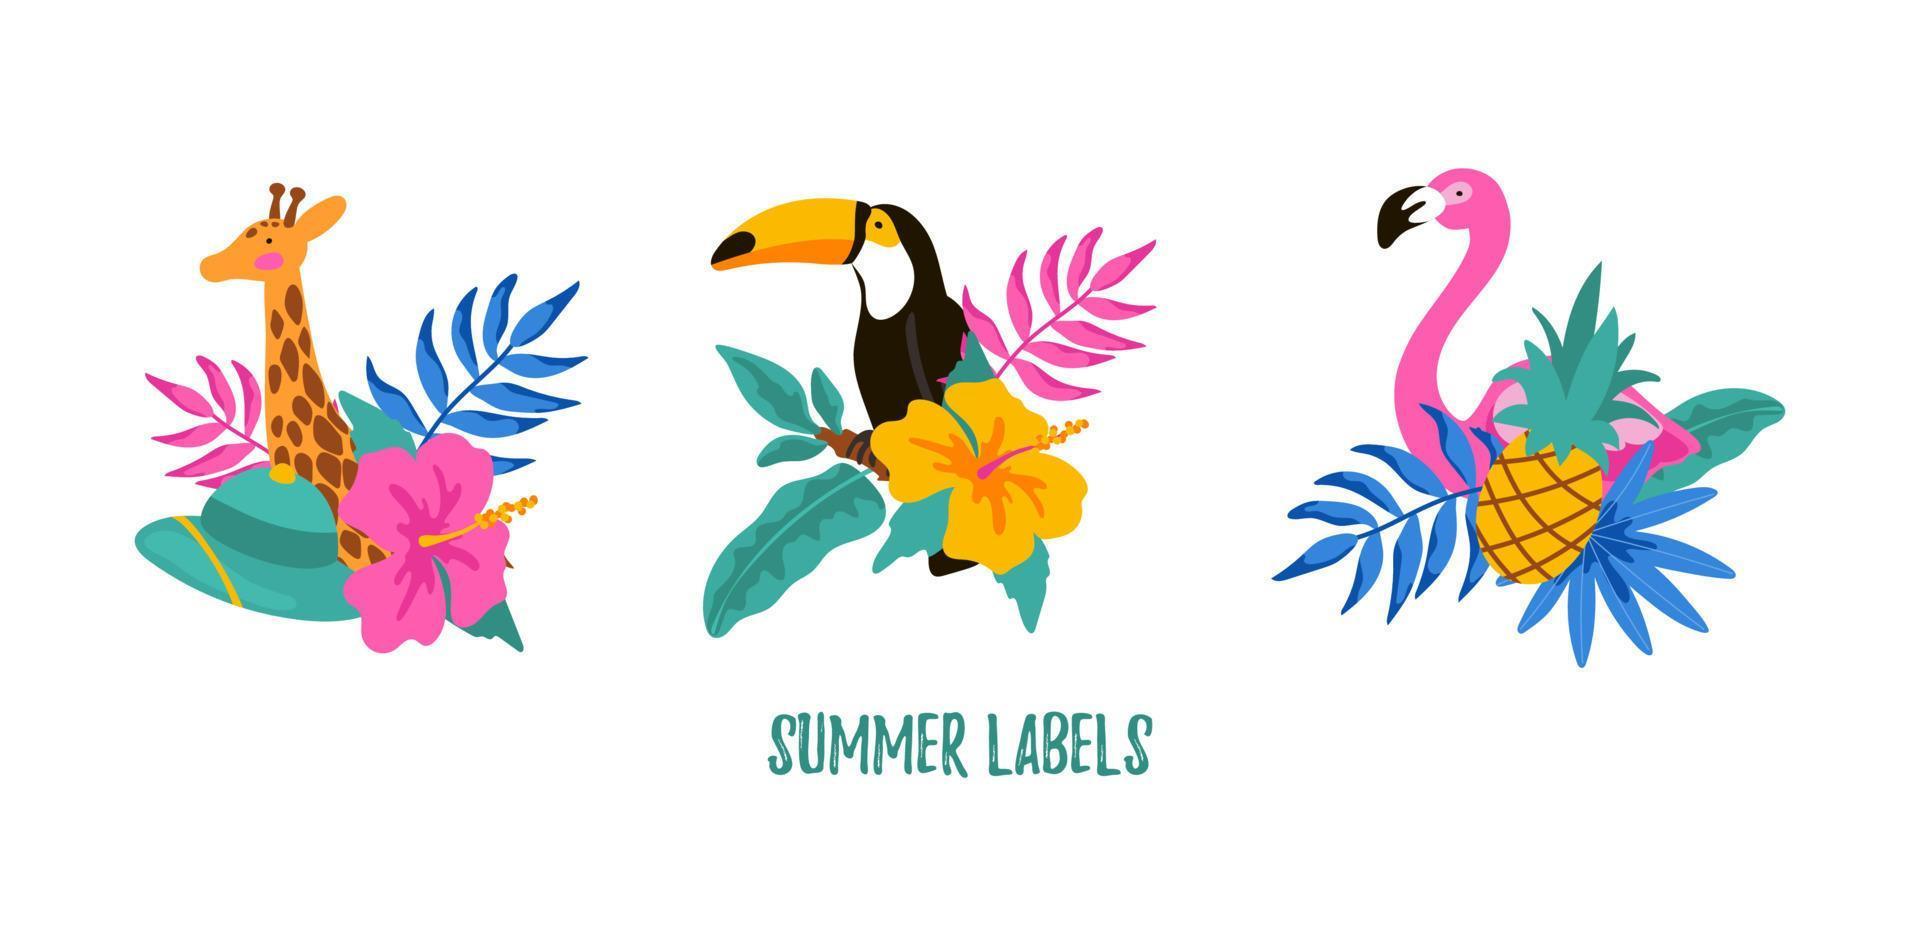 Set of hand drawn summer labels with giraffe, flamingo, toucan, tropical leaves, flowers and pineapple. Vector illustration.